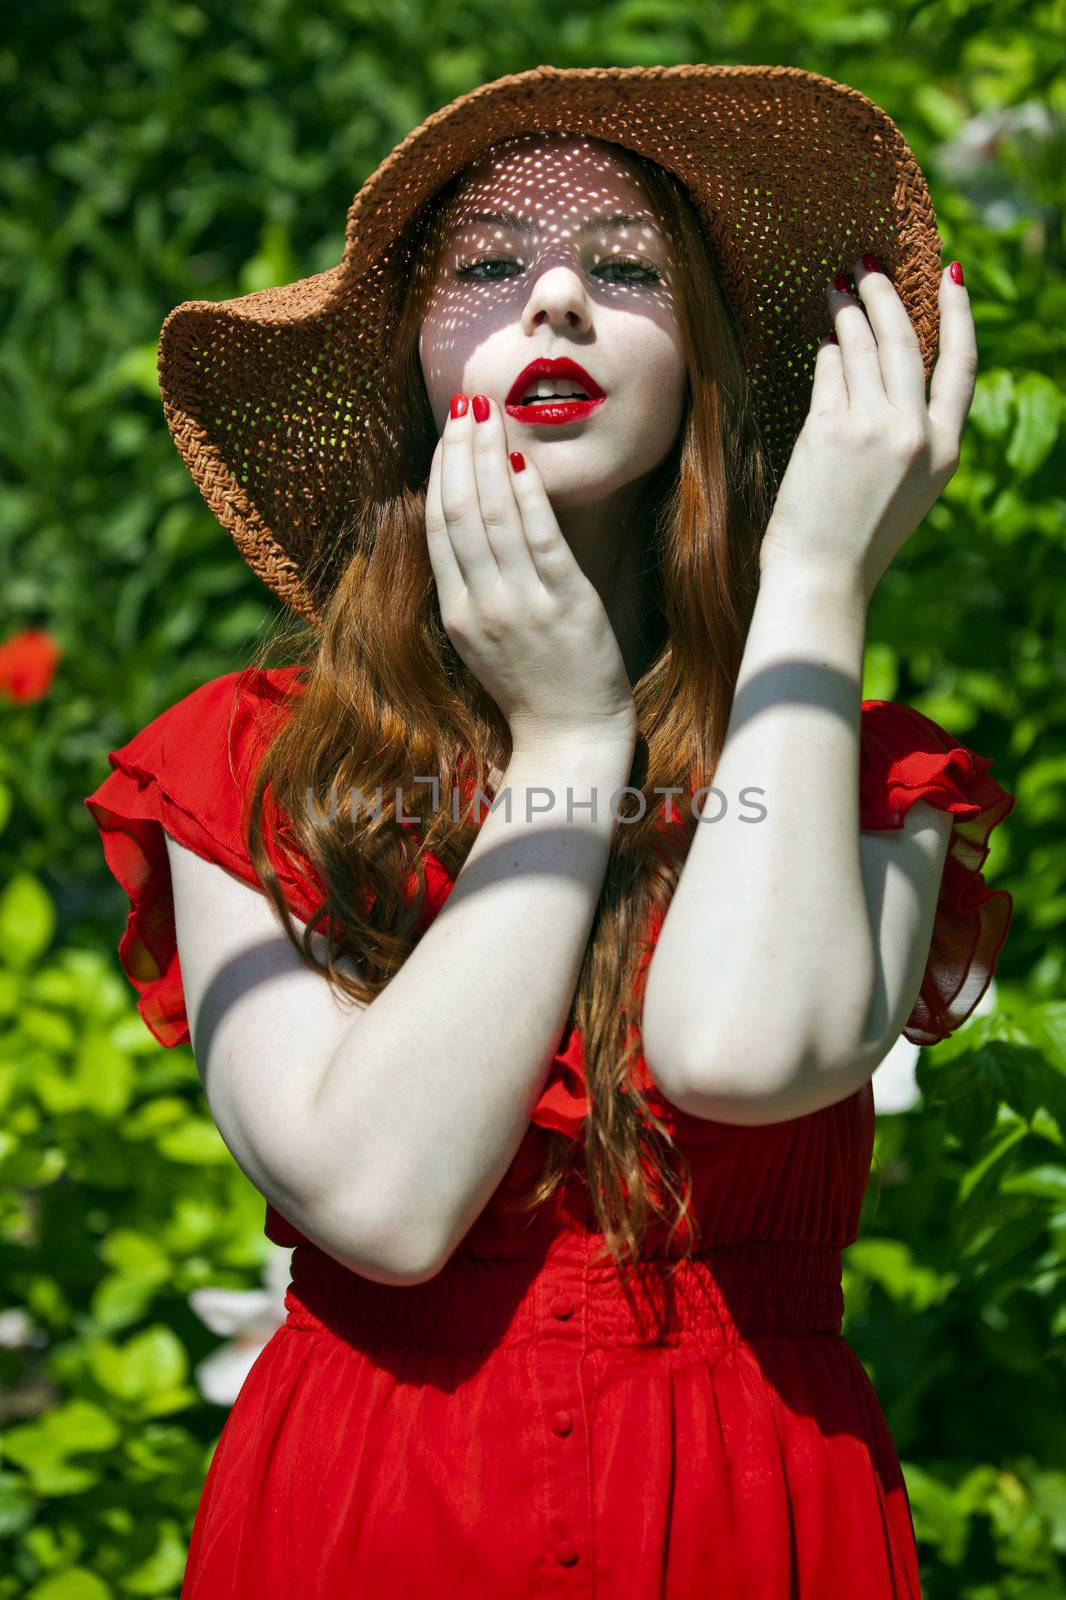 Woman in Hat by PhotoWorks